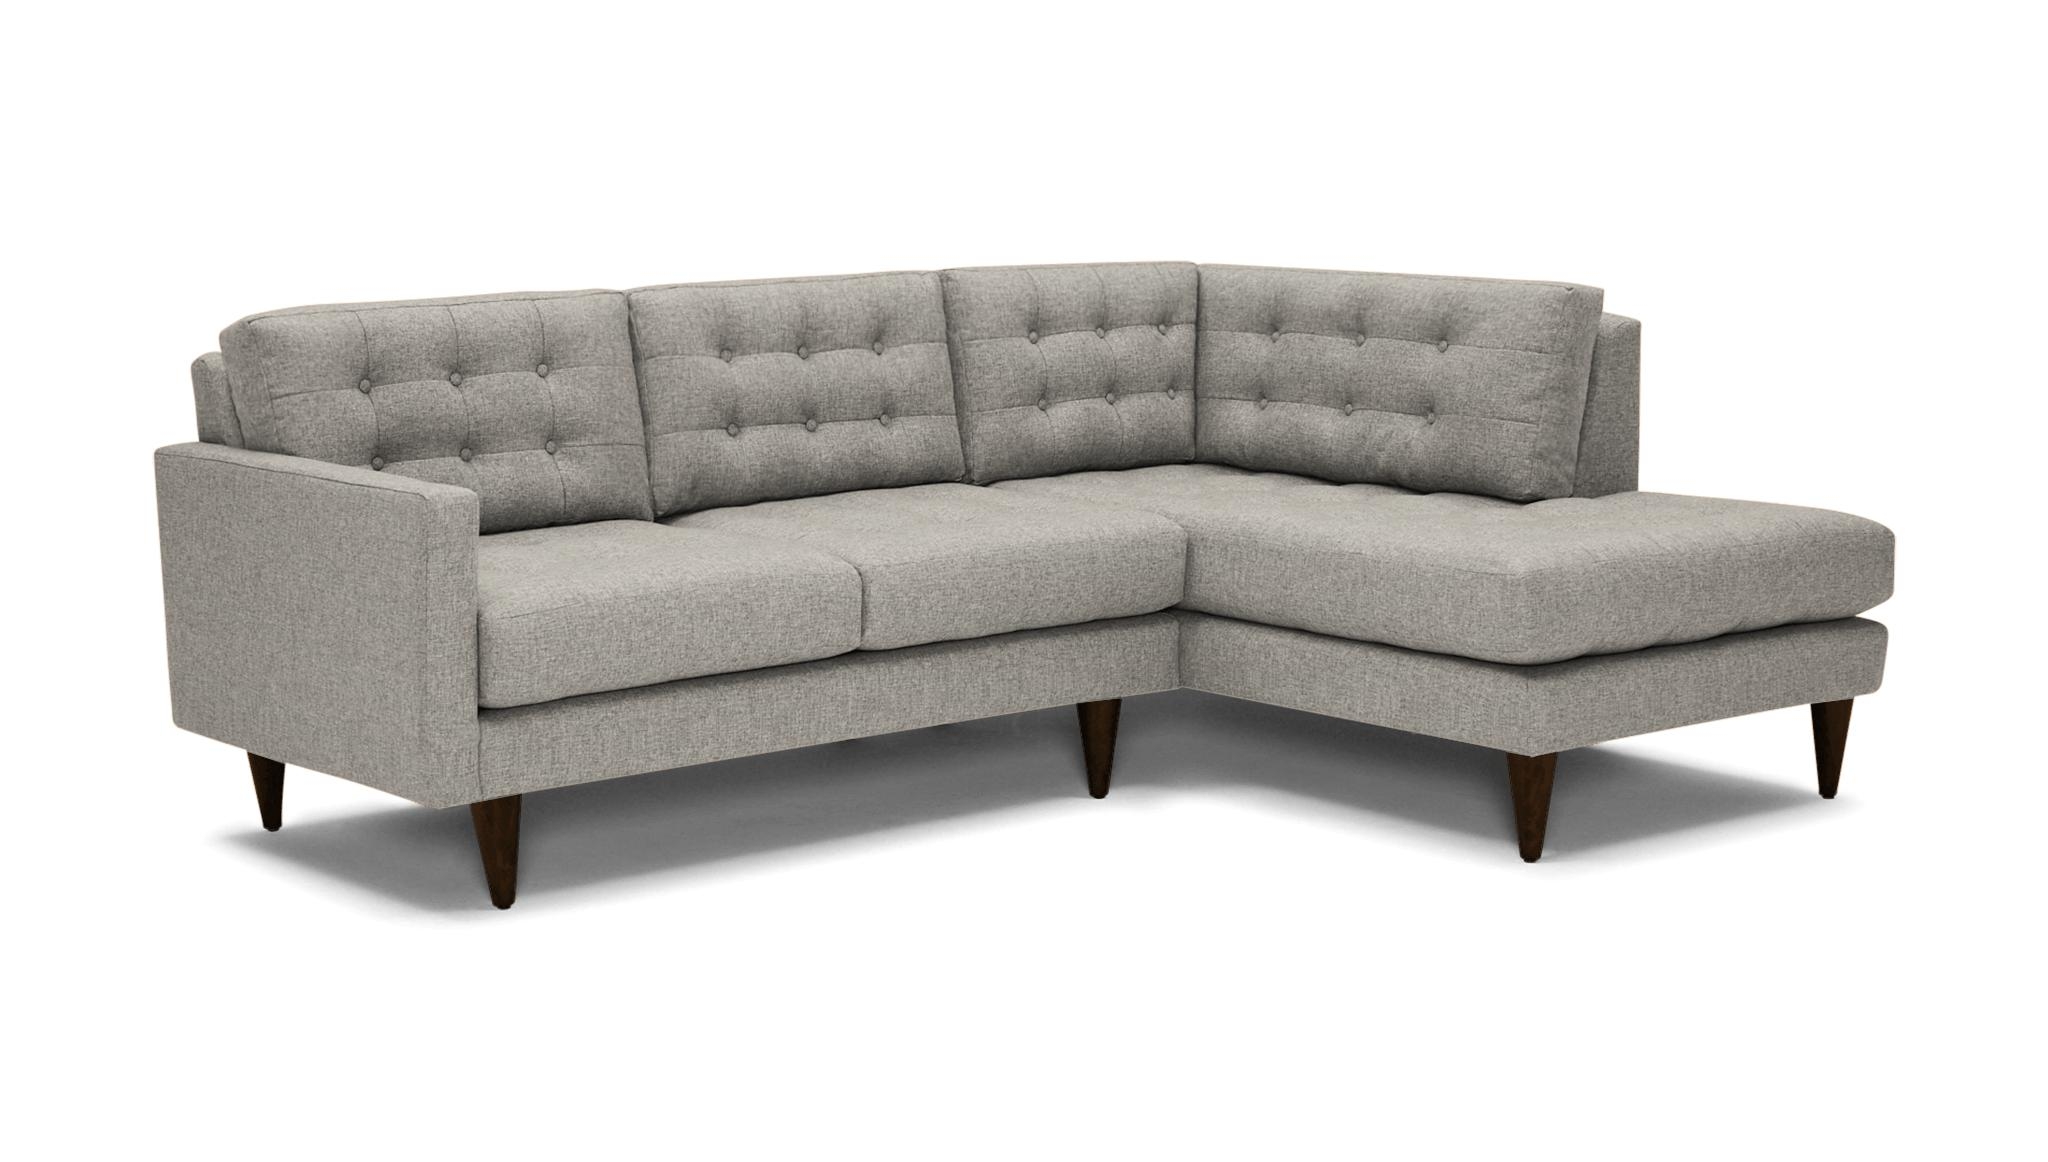 White Eliot Mid Century Modern Apartment Sectional with Bumper - Bloke Cotton - Mocha - Right  - Image 1